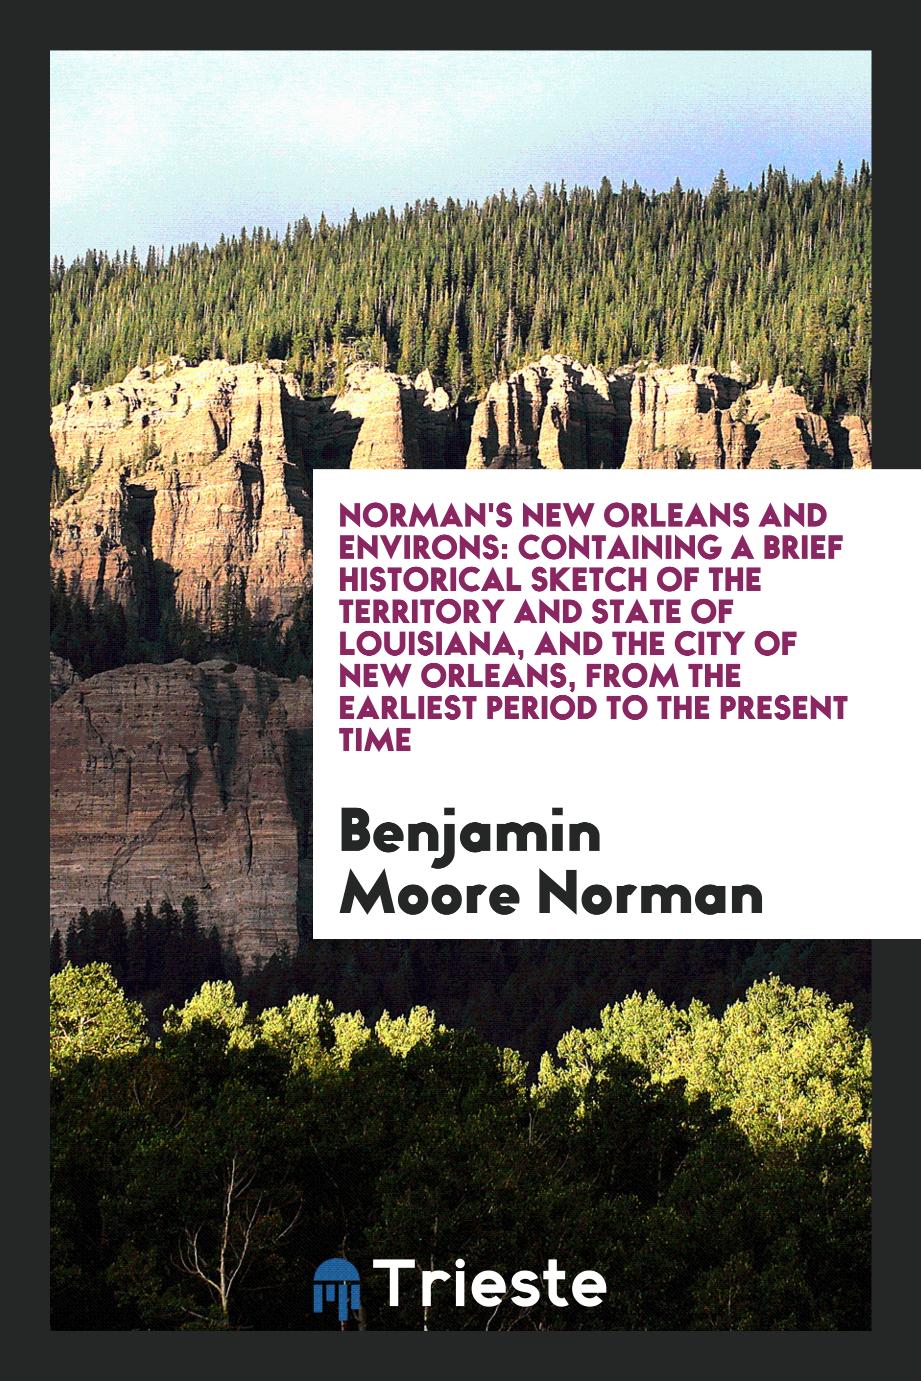 Norman's New Orleans and environs: containing a brief historical sketch of the territory and state of Louisiana, and the city of New Orleans, from the earliest period to the present time